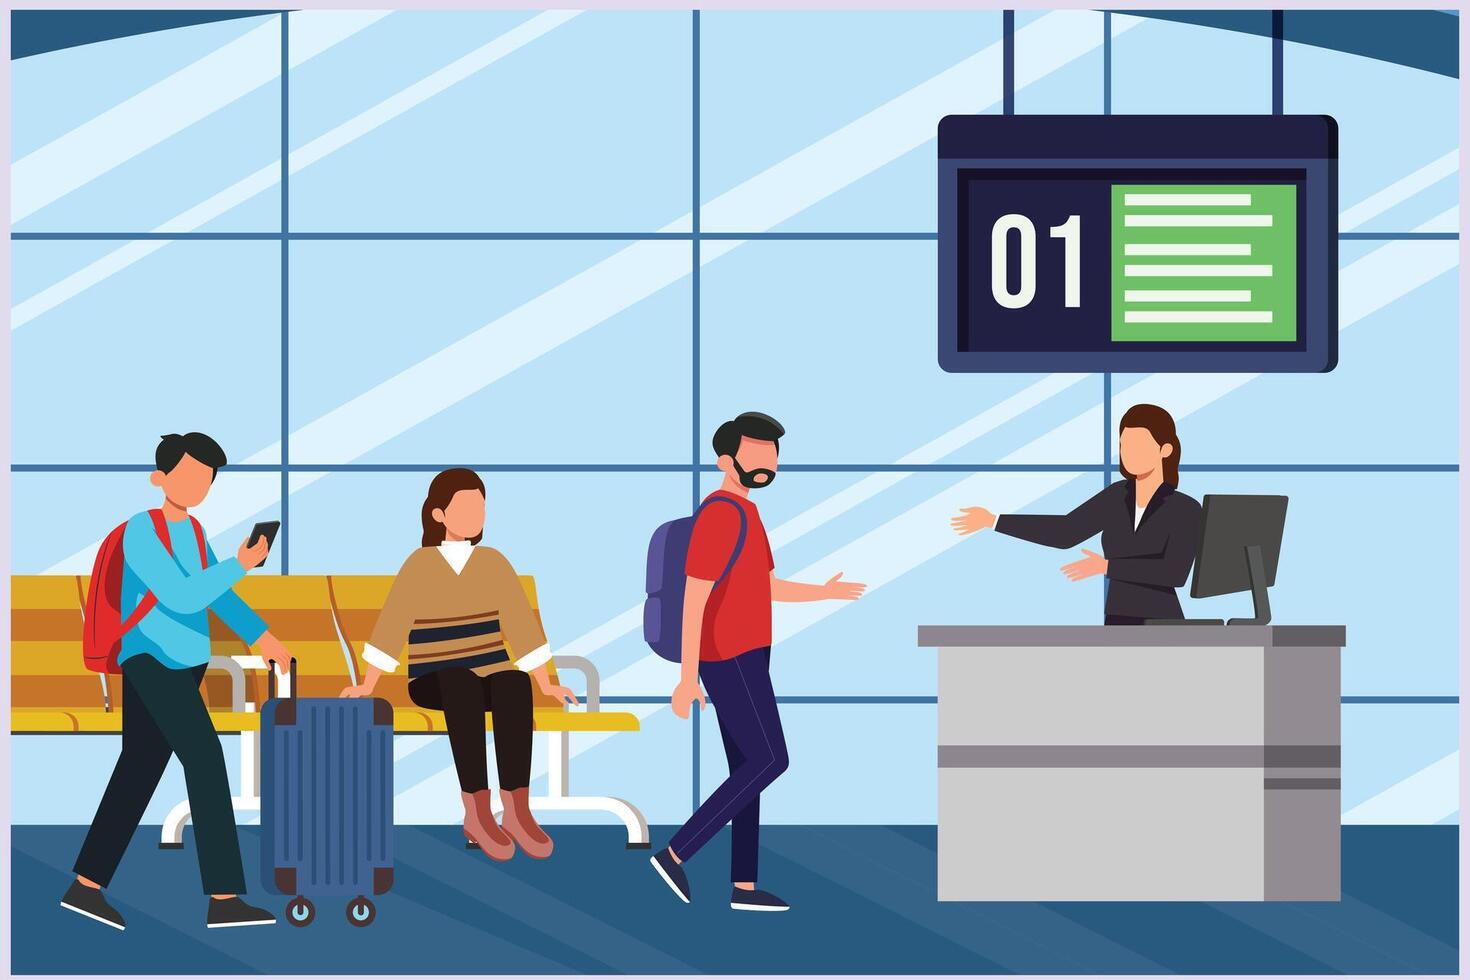 Happy people traveling at airport. Concept of passenger activities at the airport. Colored flat vector illustration isolated.